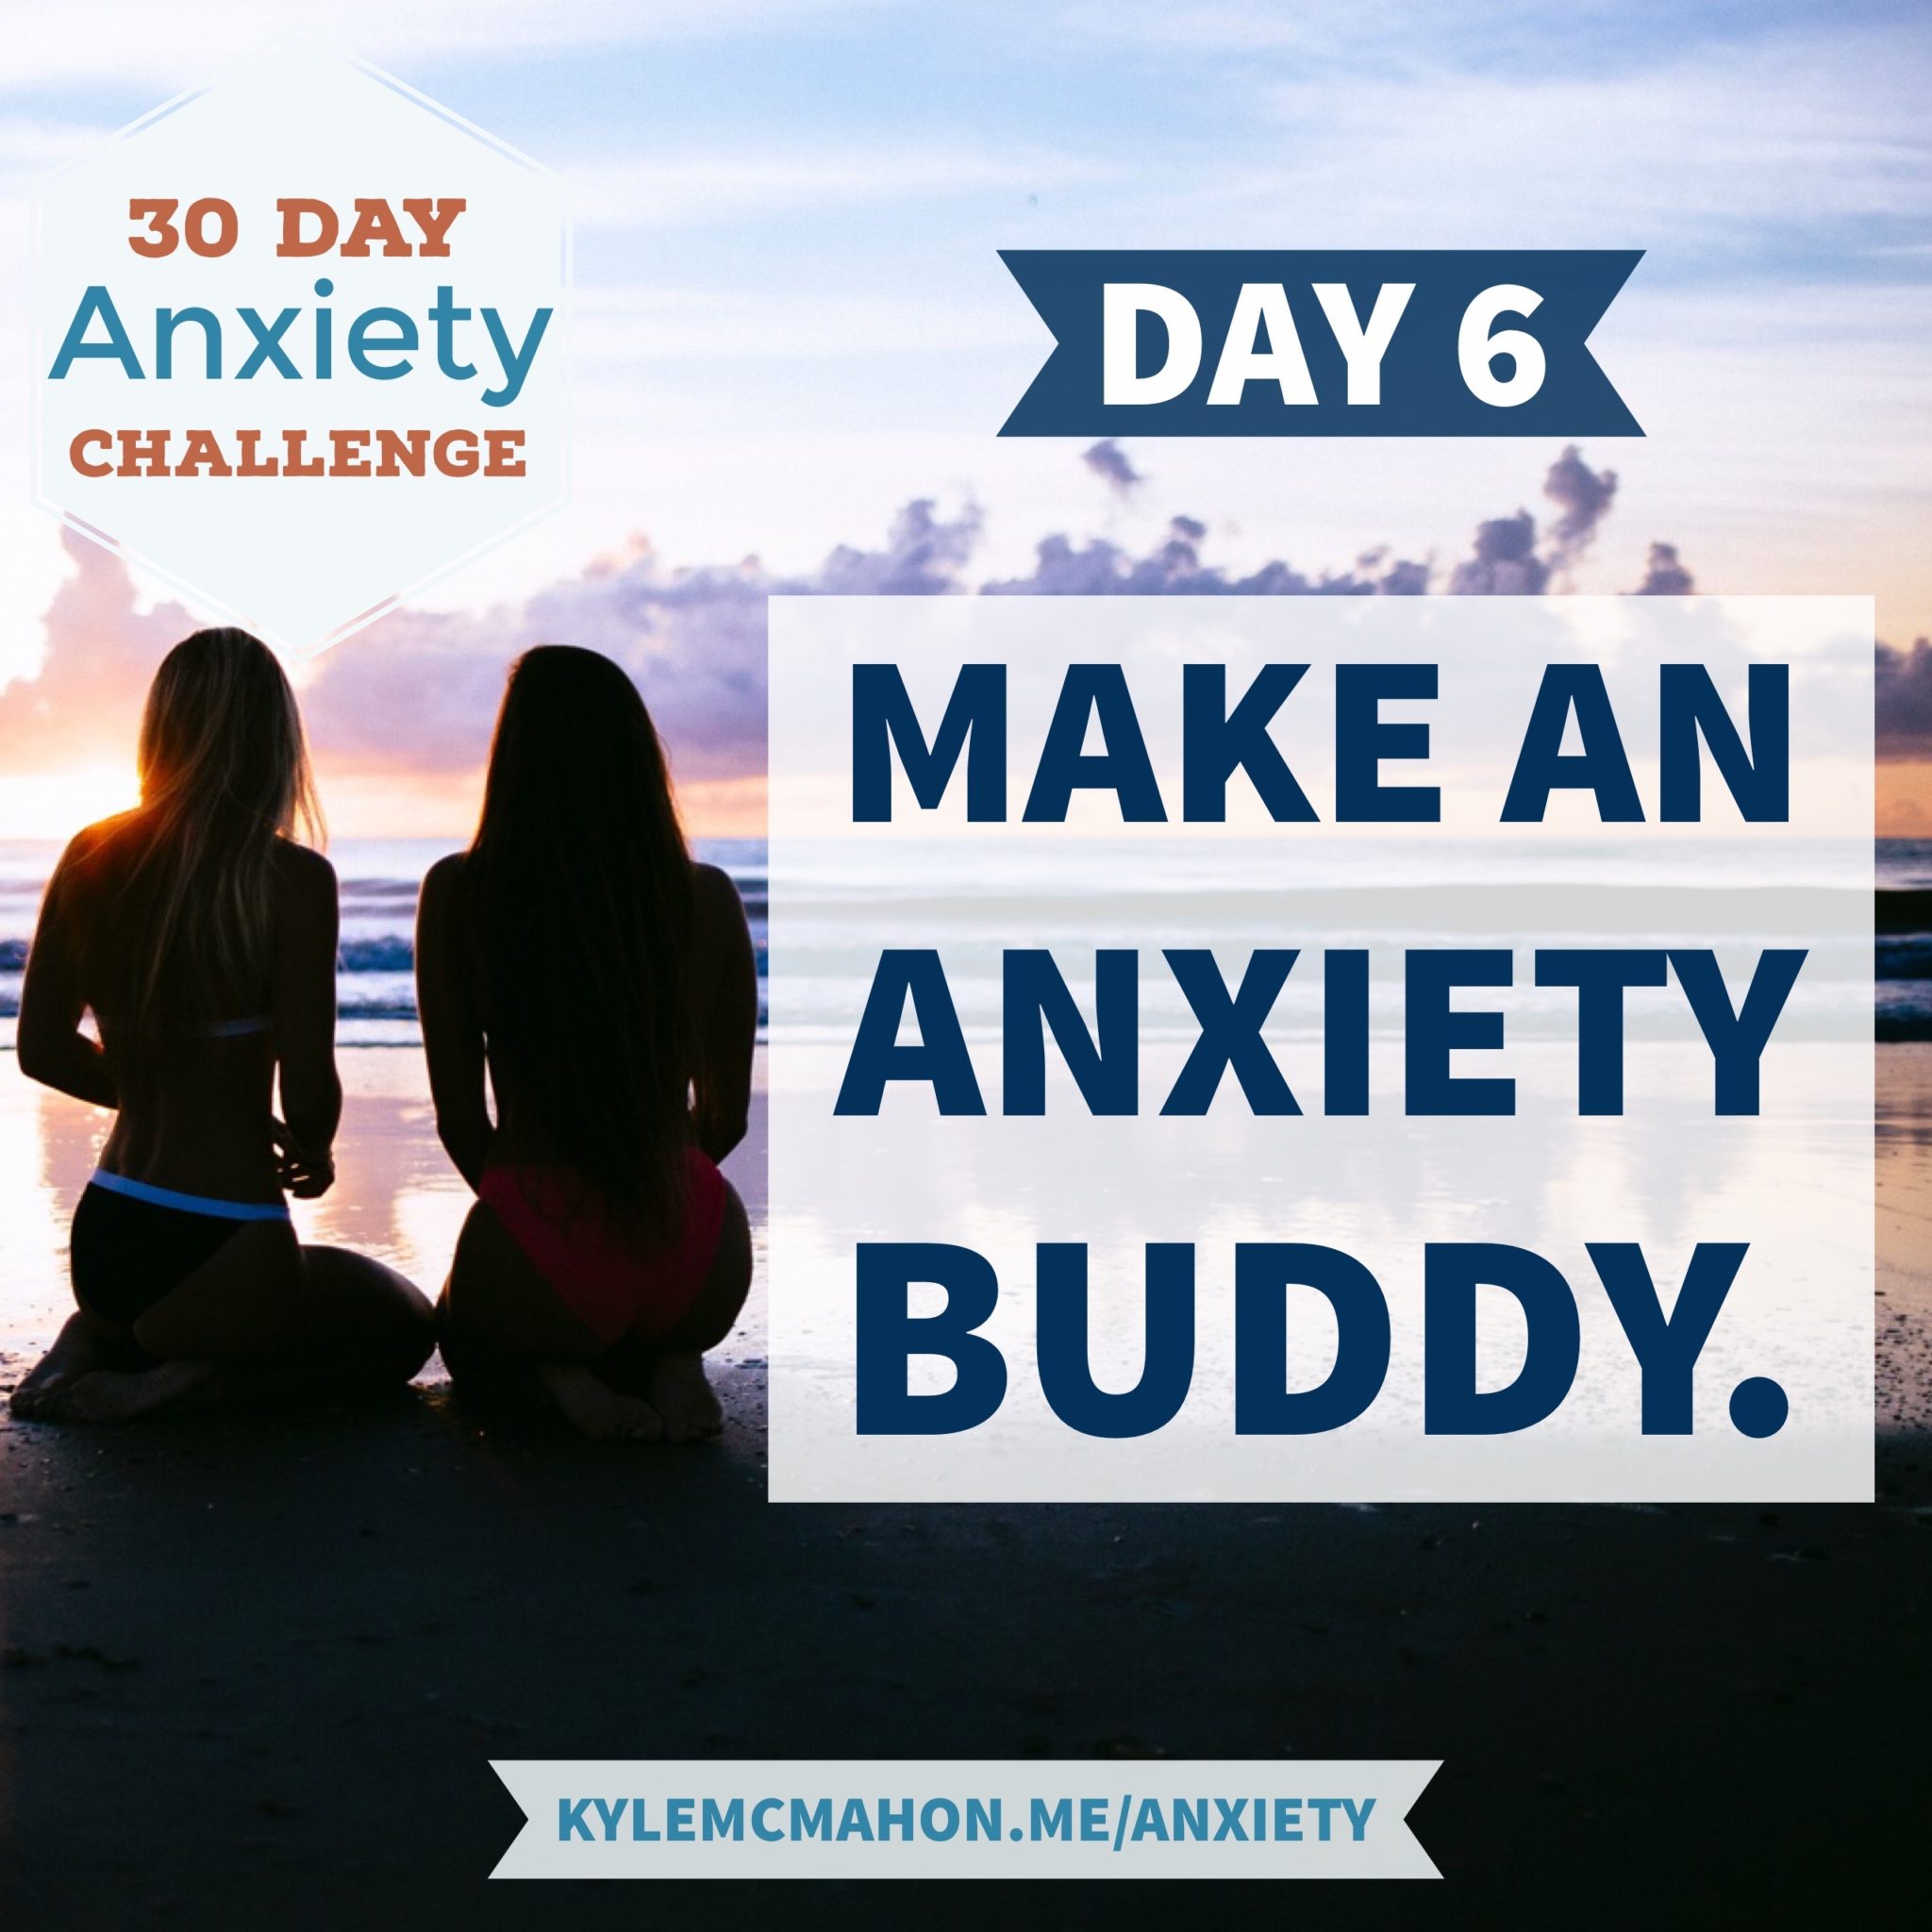 Day 6 - 30 Day Anxiety Challenge with Kyle McMahon * Anxiety Buddy